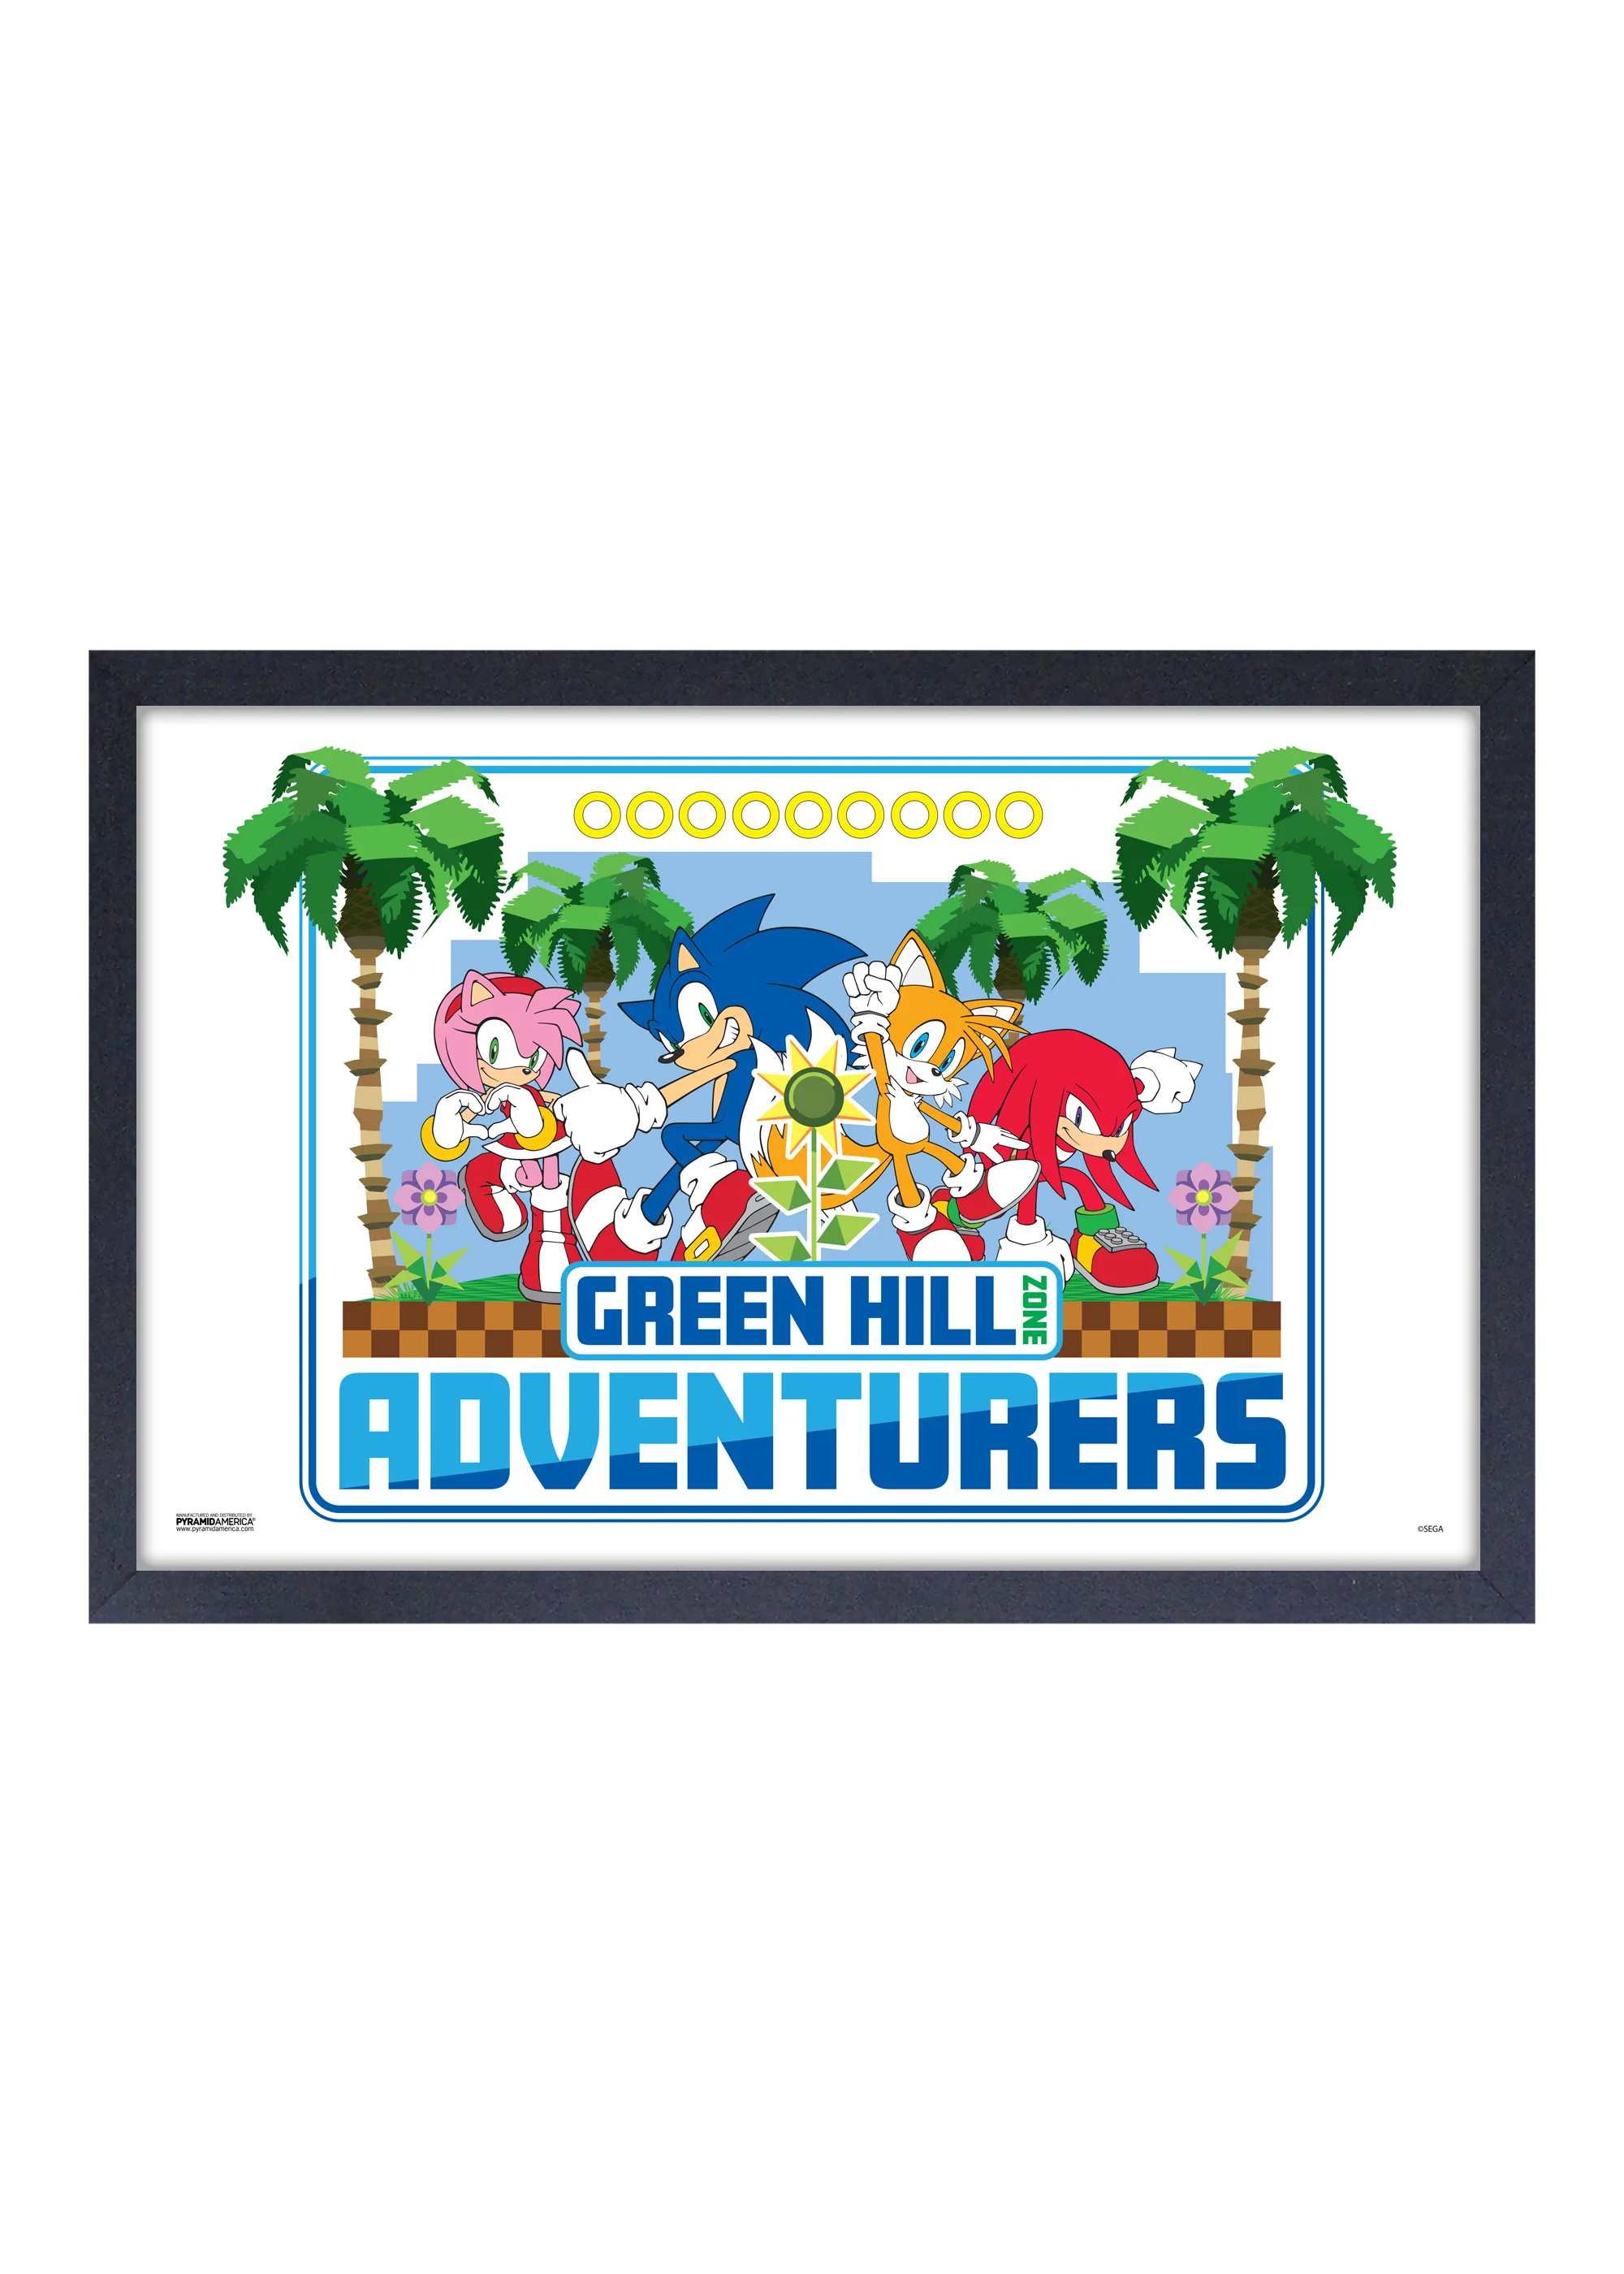 Sonic the Hedgehog - Green Hill Adventures (11"x17" Gel-Coat) (Order in multiples of 6, mix and match styles)